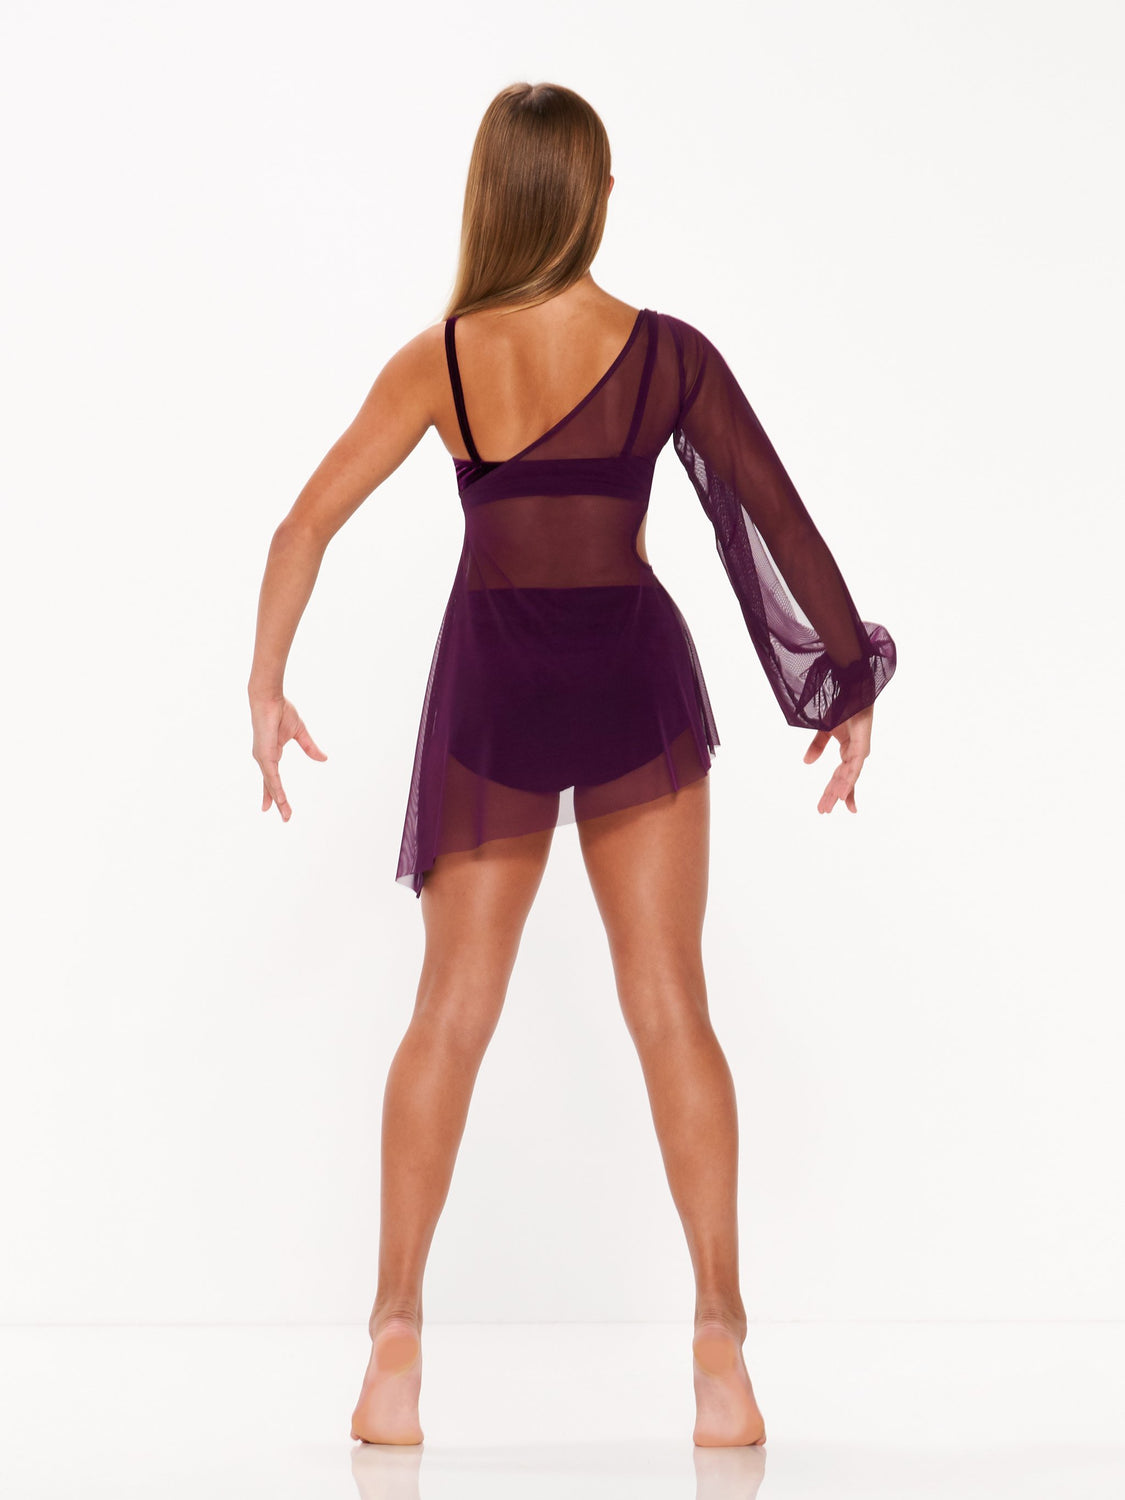 Shop fashionable The Grace in Lace Collection dance costumes